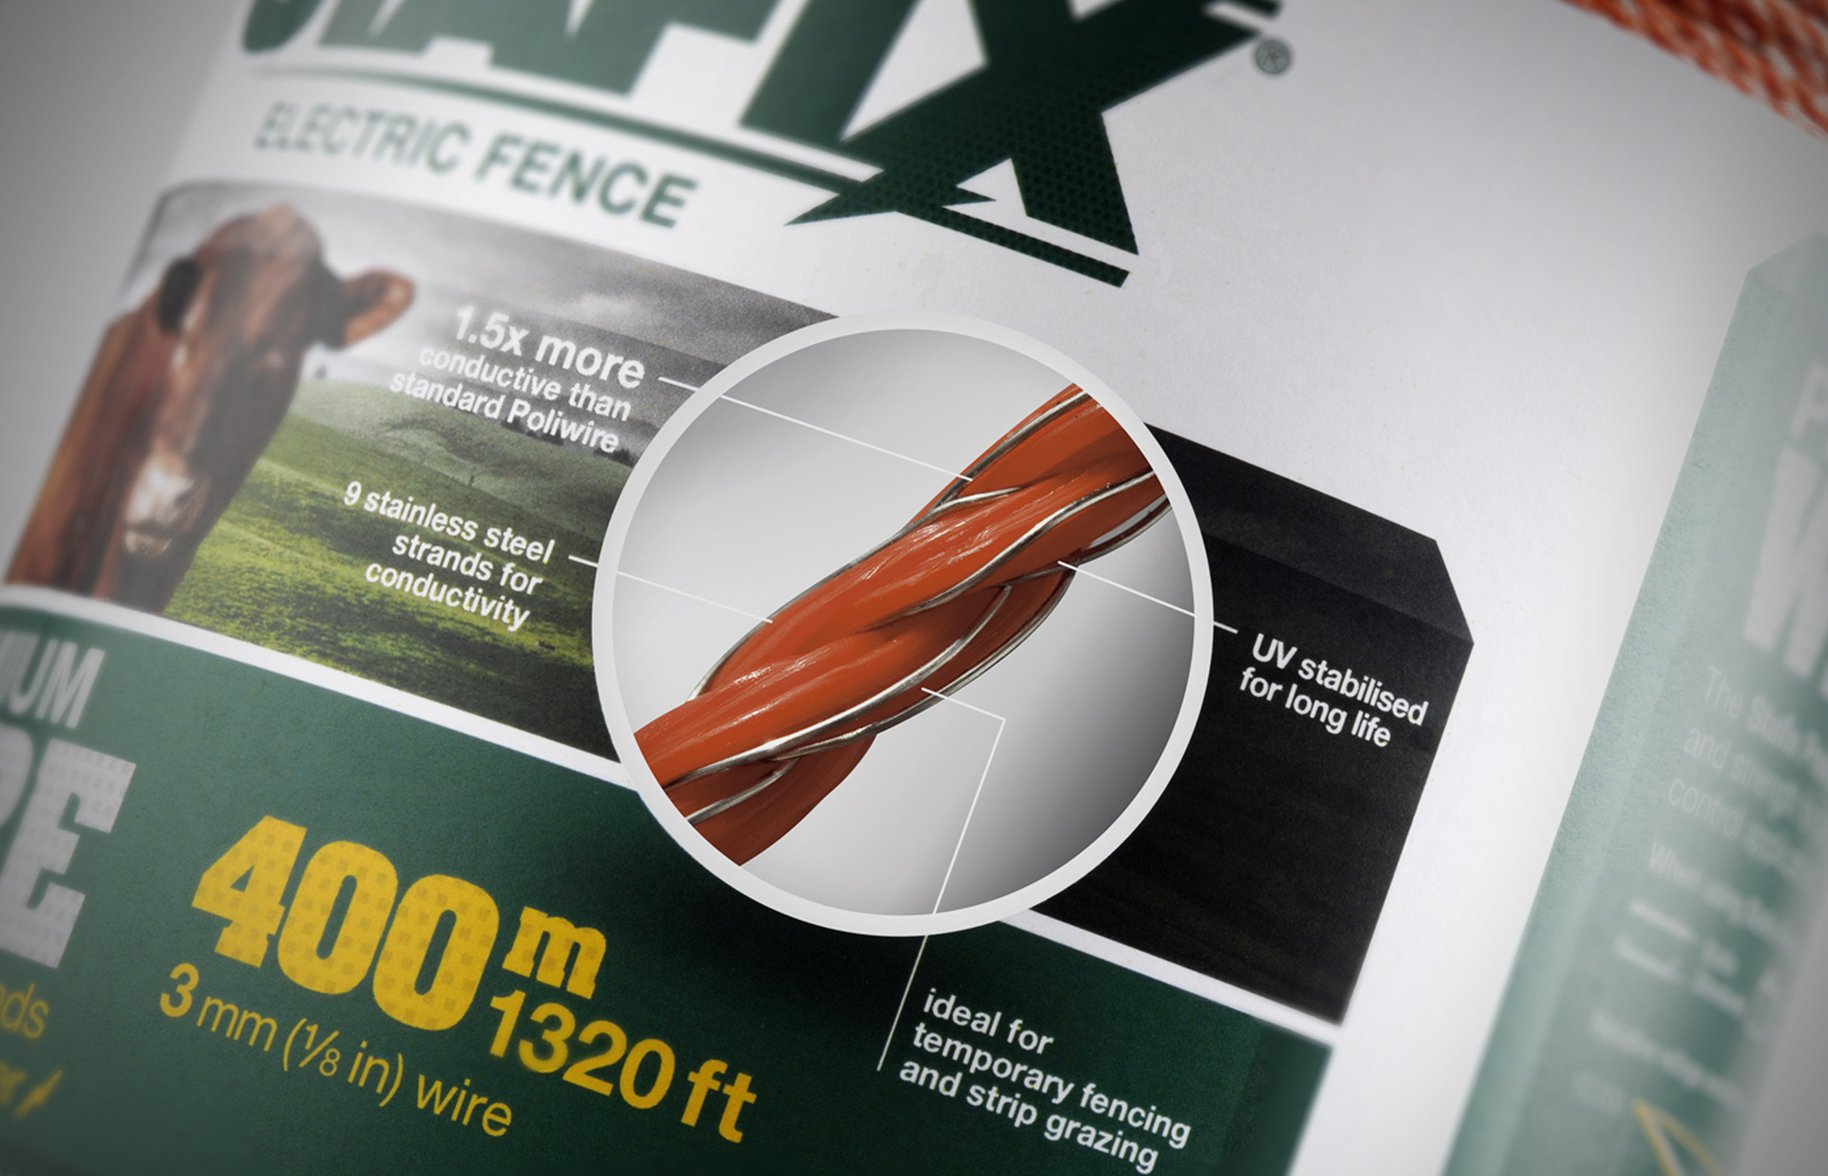 Stafix electric fence packaging details